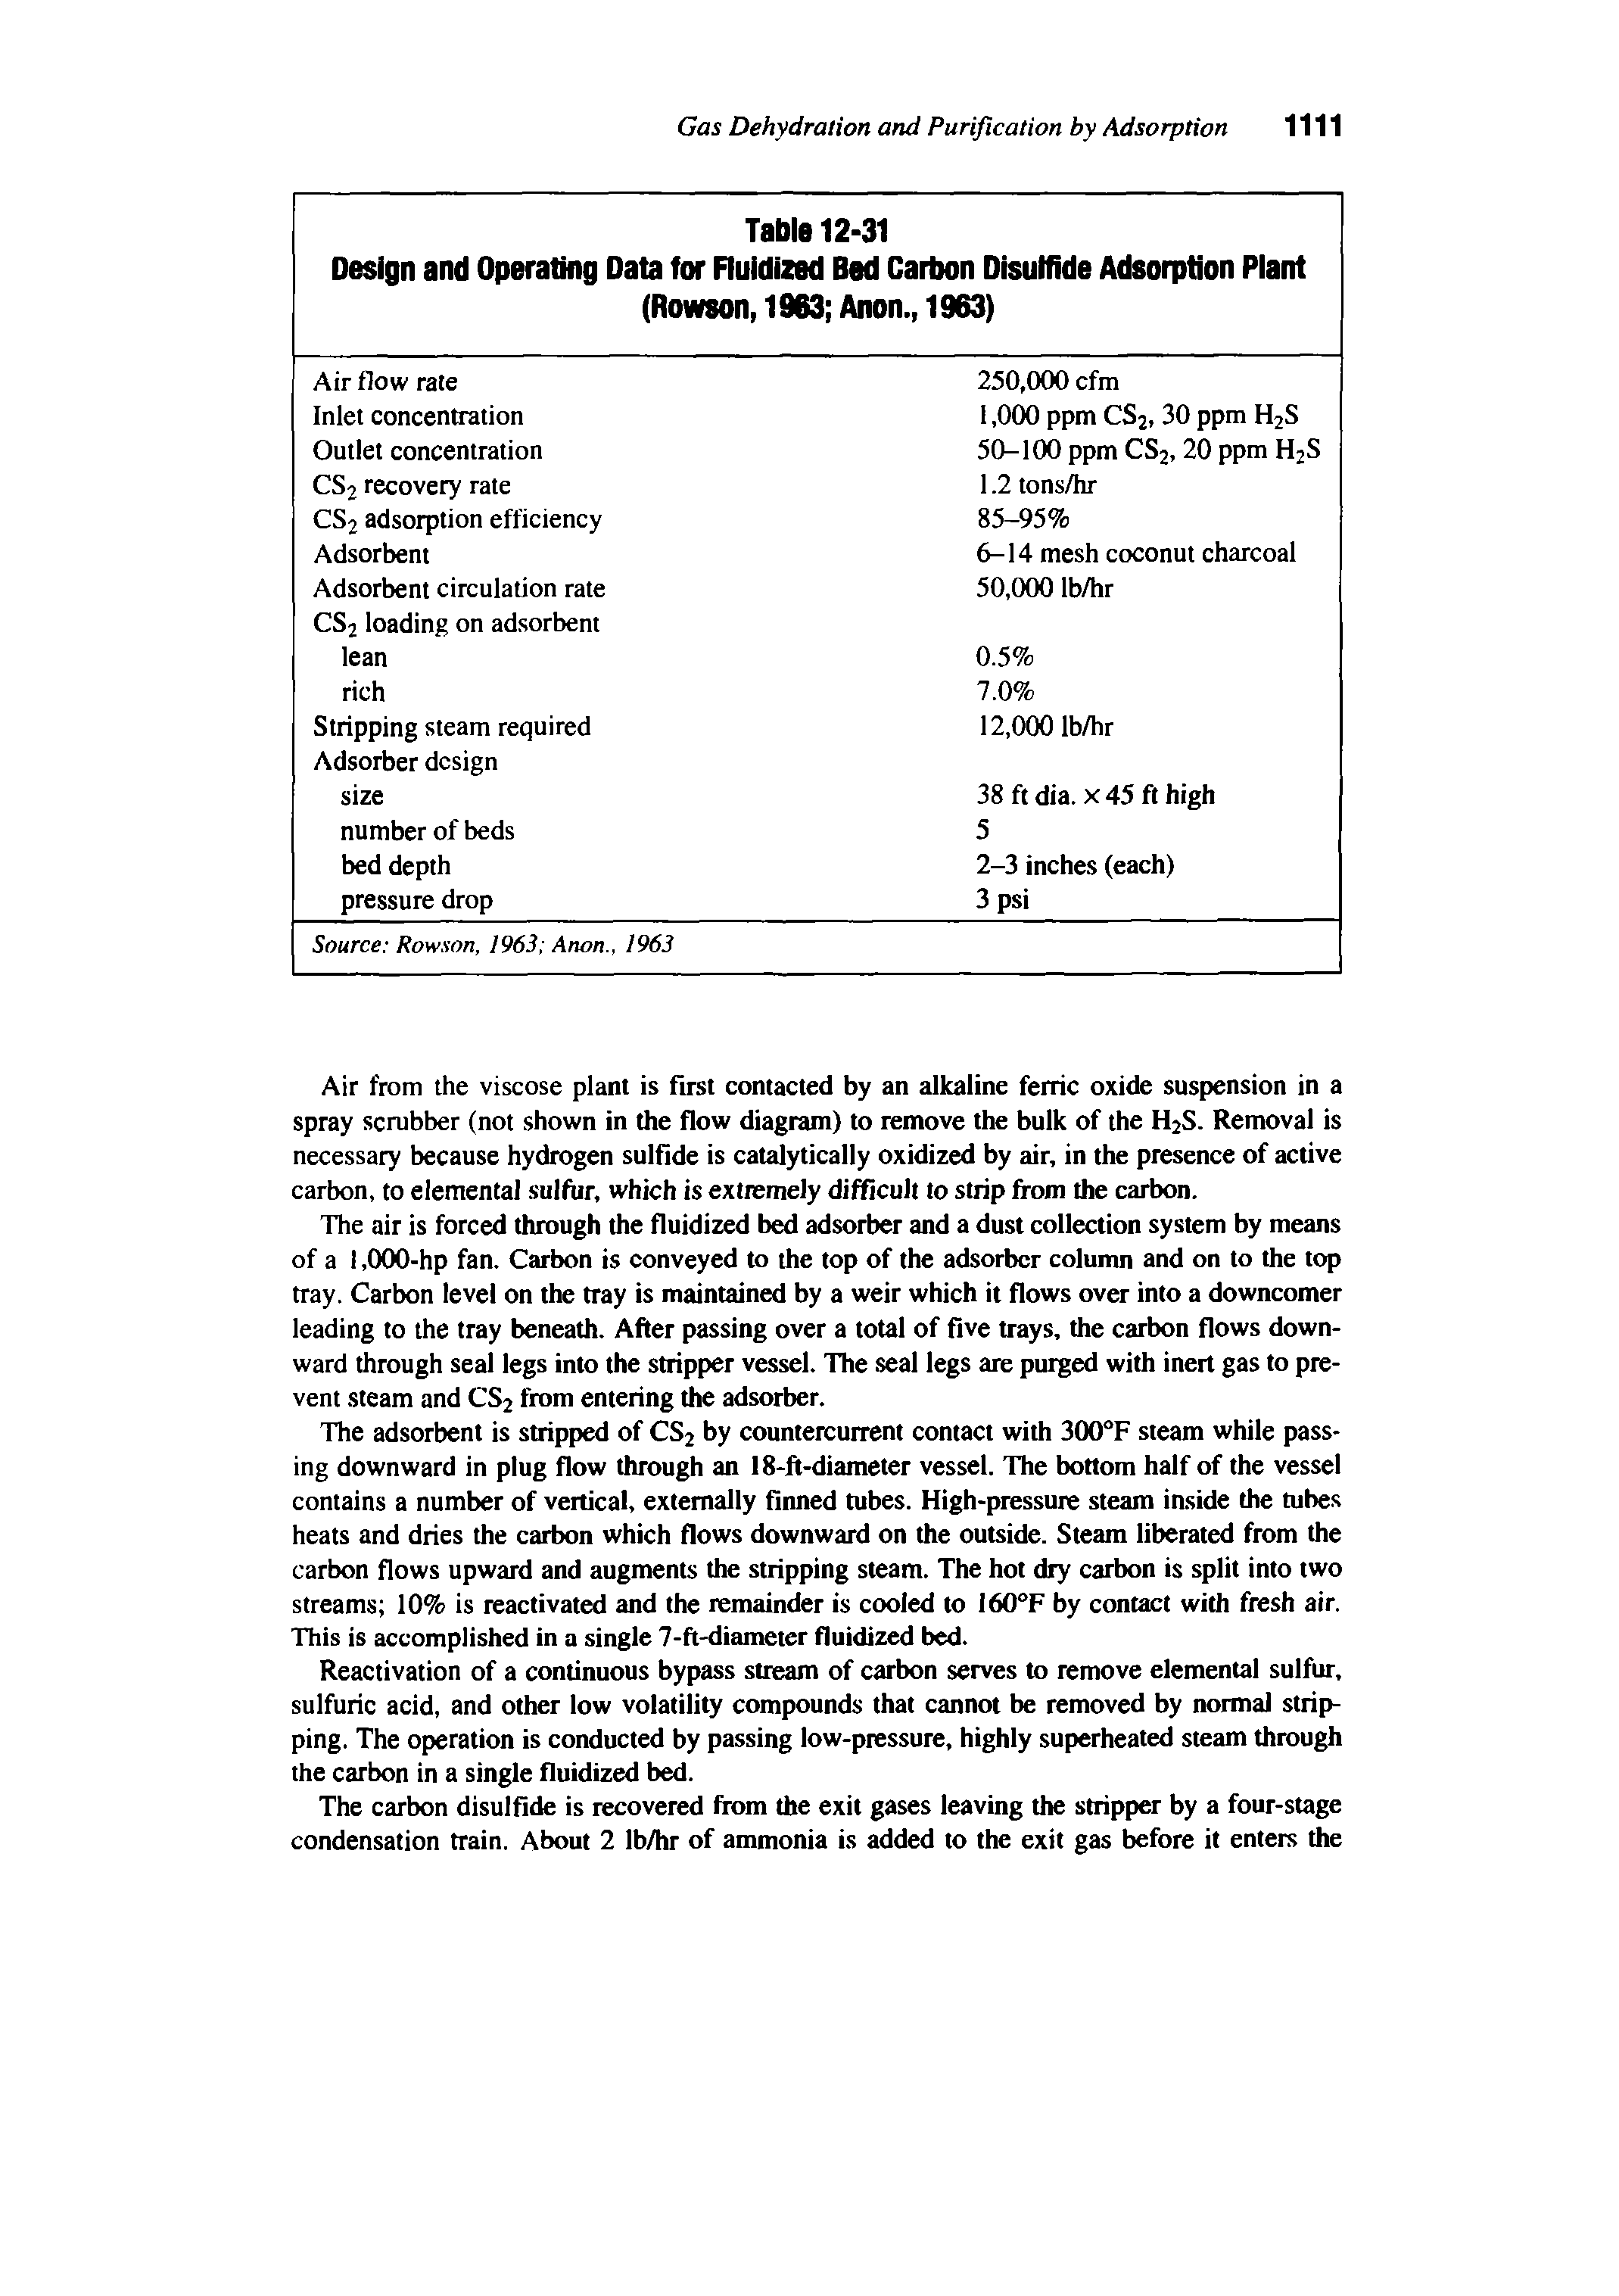 Table 12-31 Design and Operating Data for Ruidized Bed Carbon Disulfide Adsorption Plant (Rowson, 1963 Anon., 1963) ...